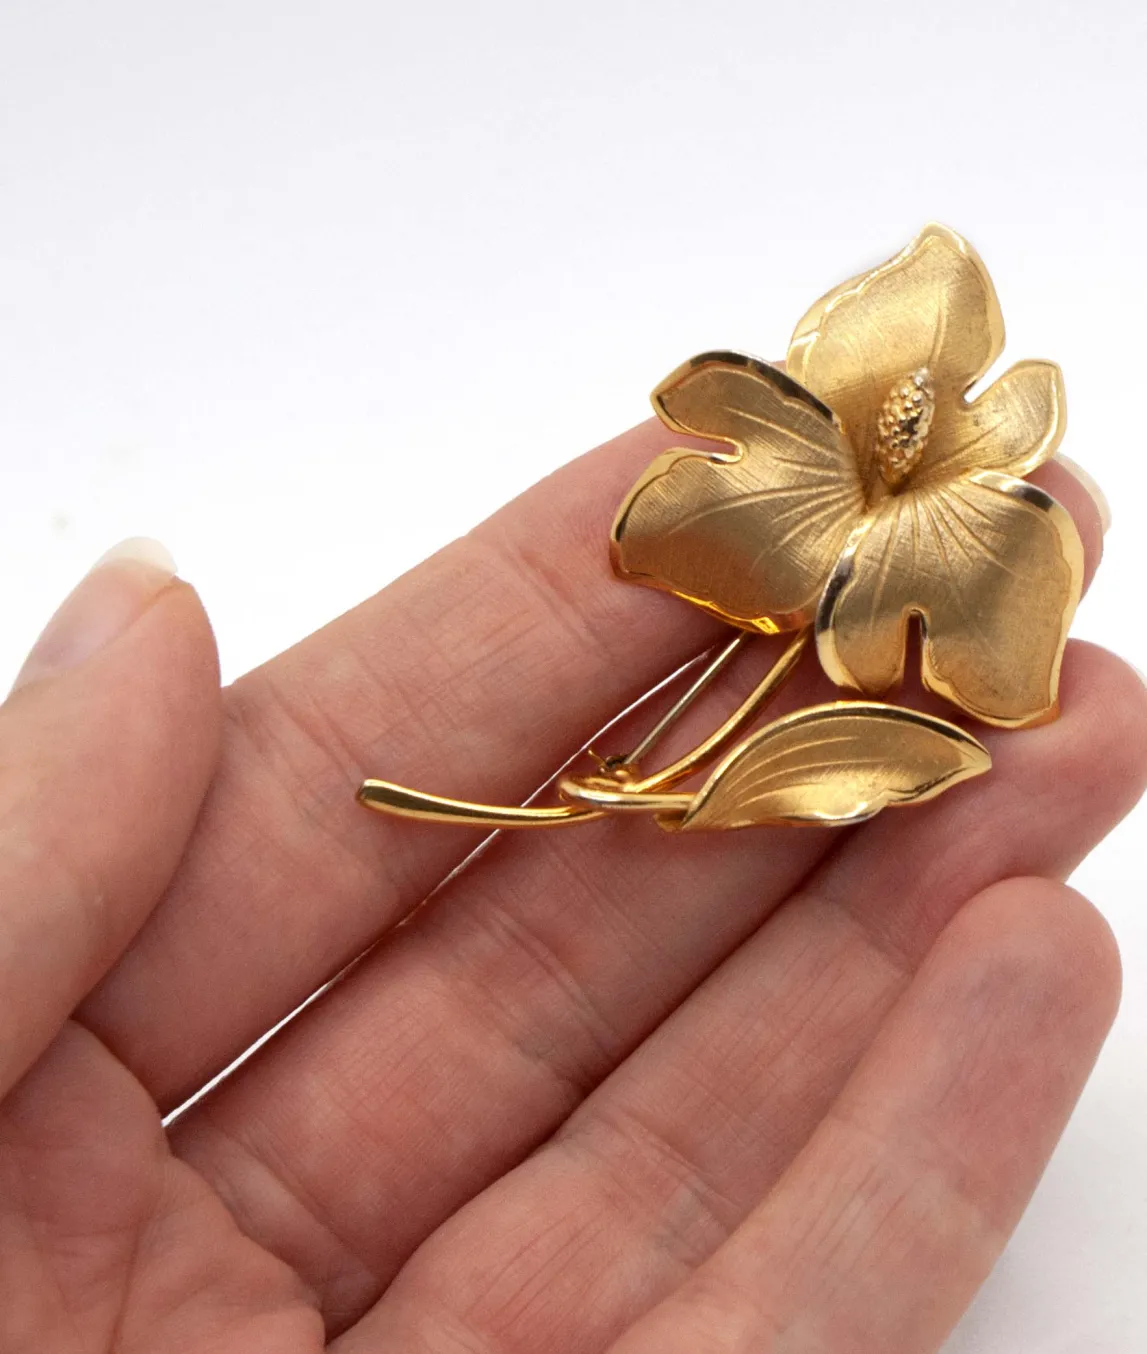 Ecco Rolled Gold Floral Brooch Pin held in hand